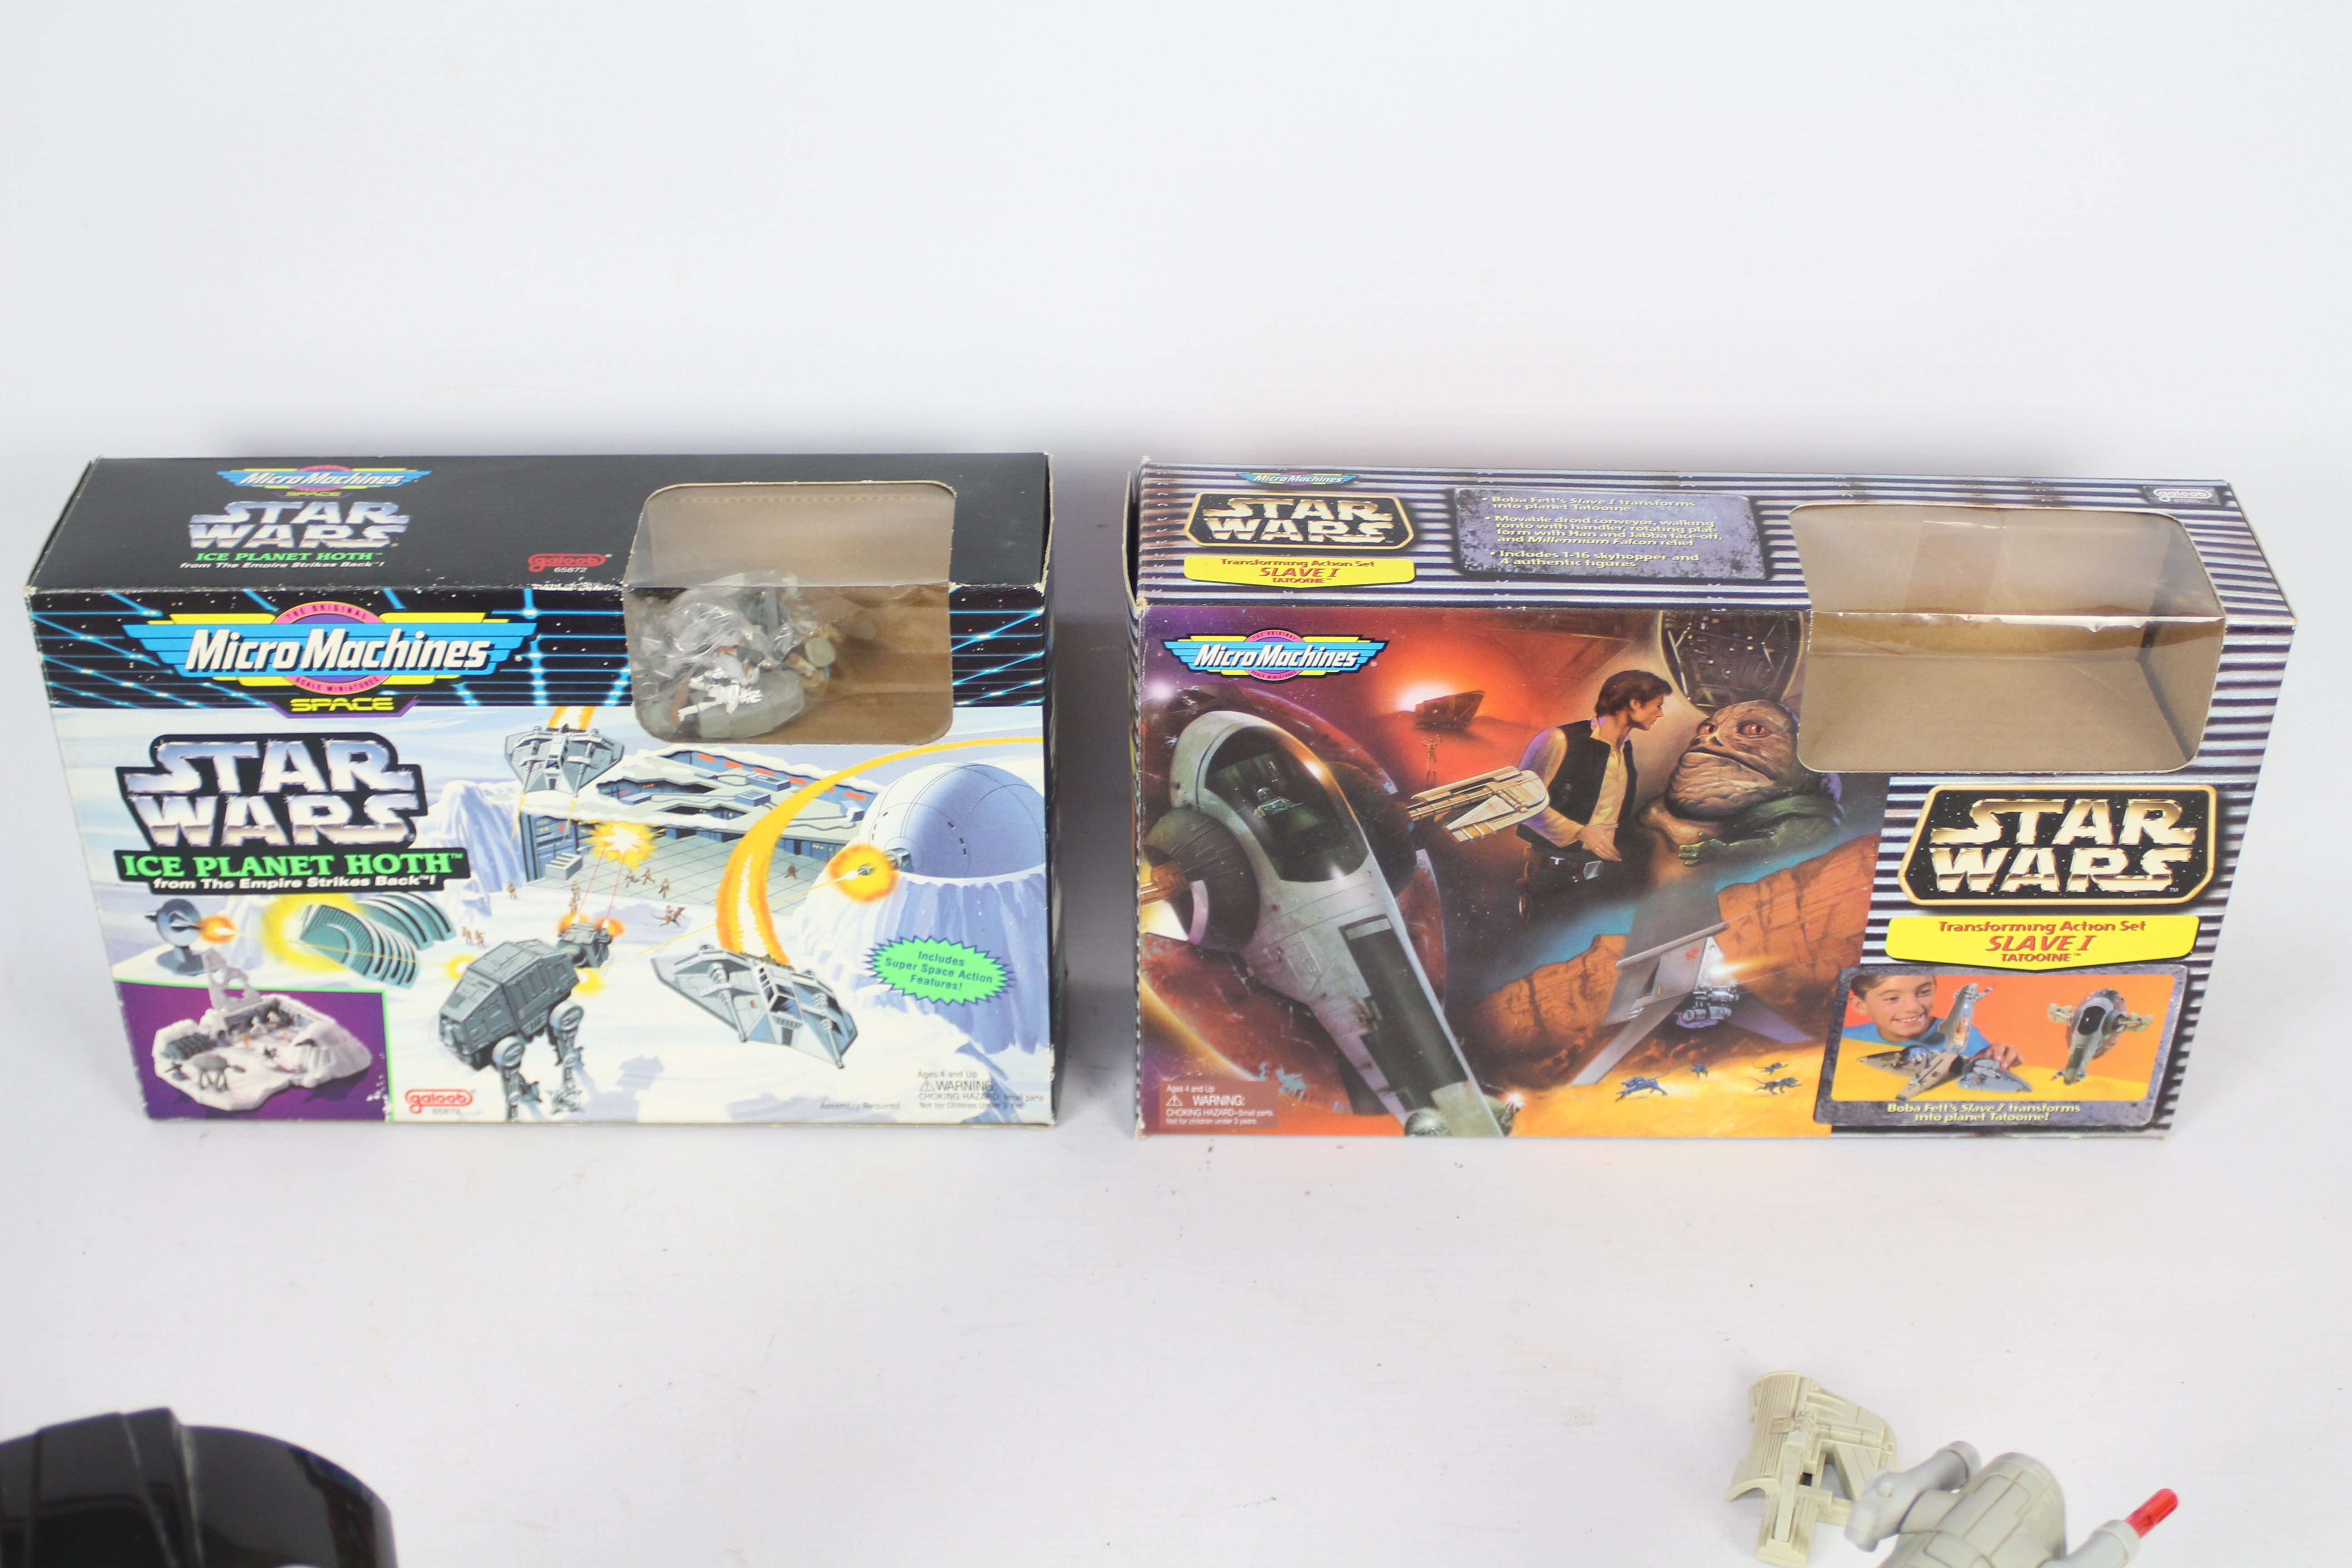 Star Wars, Galoob, Micro Machines - A collection of Galoob Star War Micro Machines. - Image 3 of 3